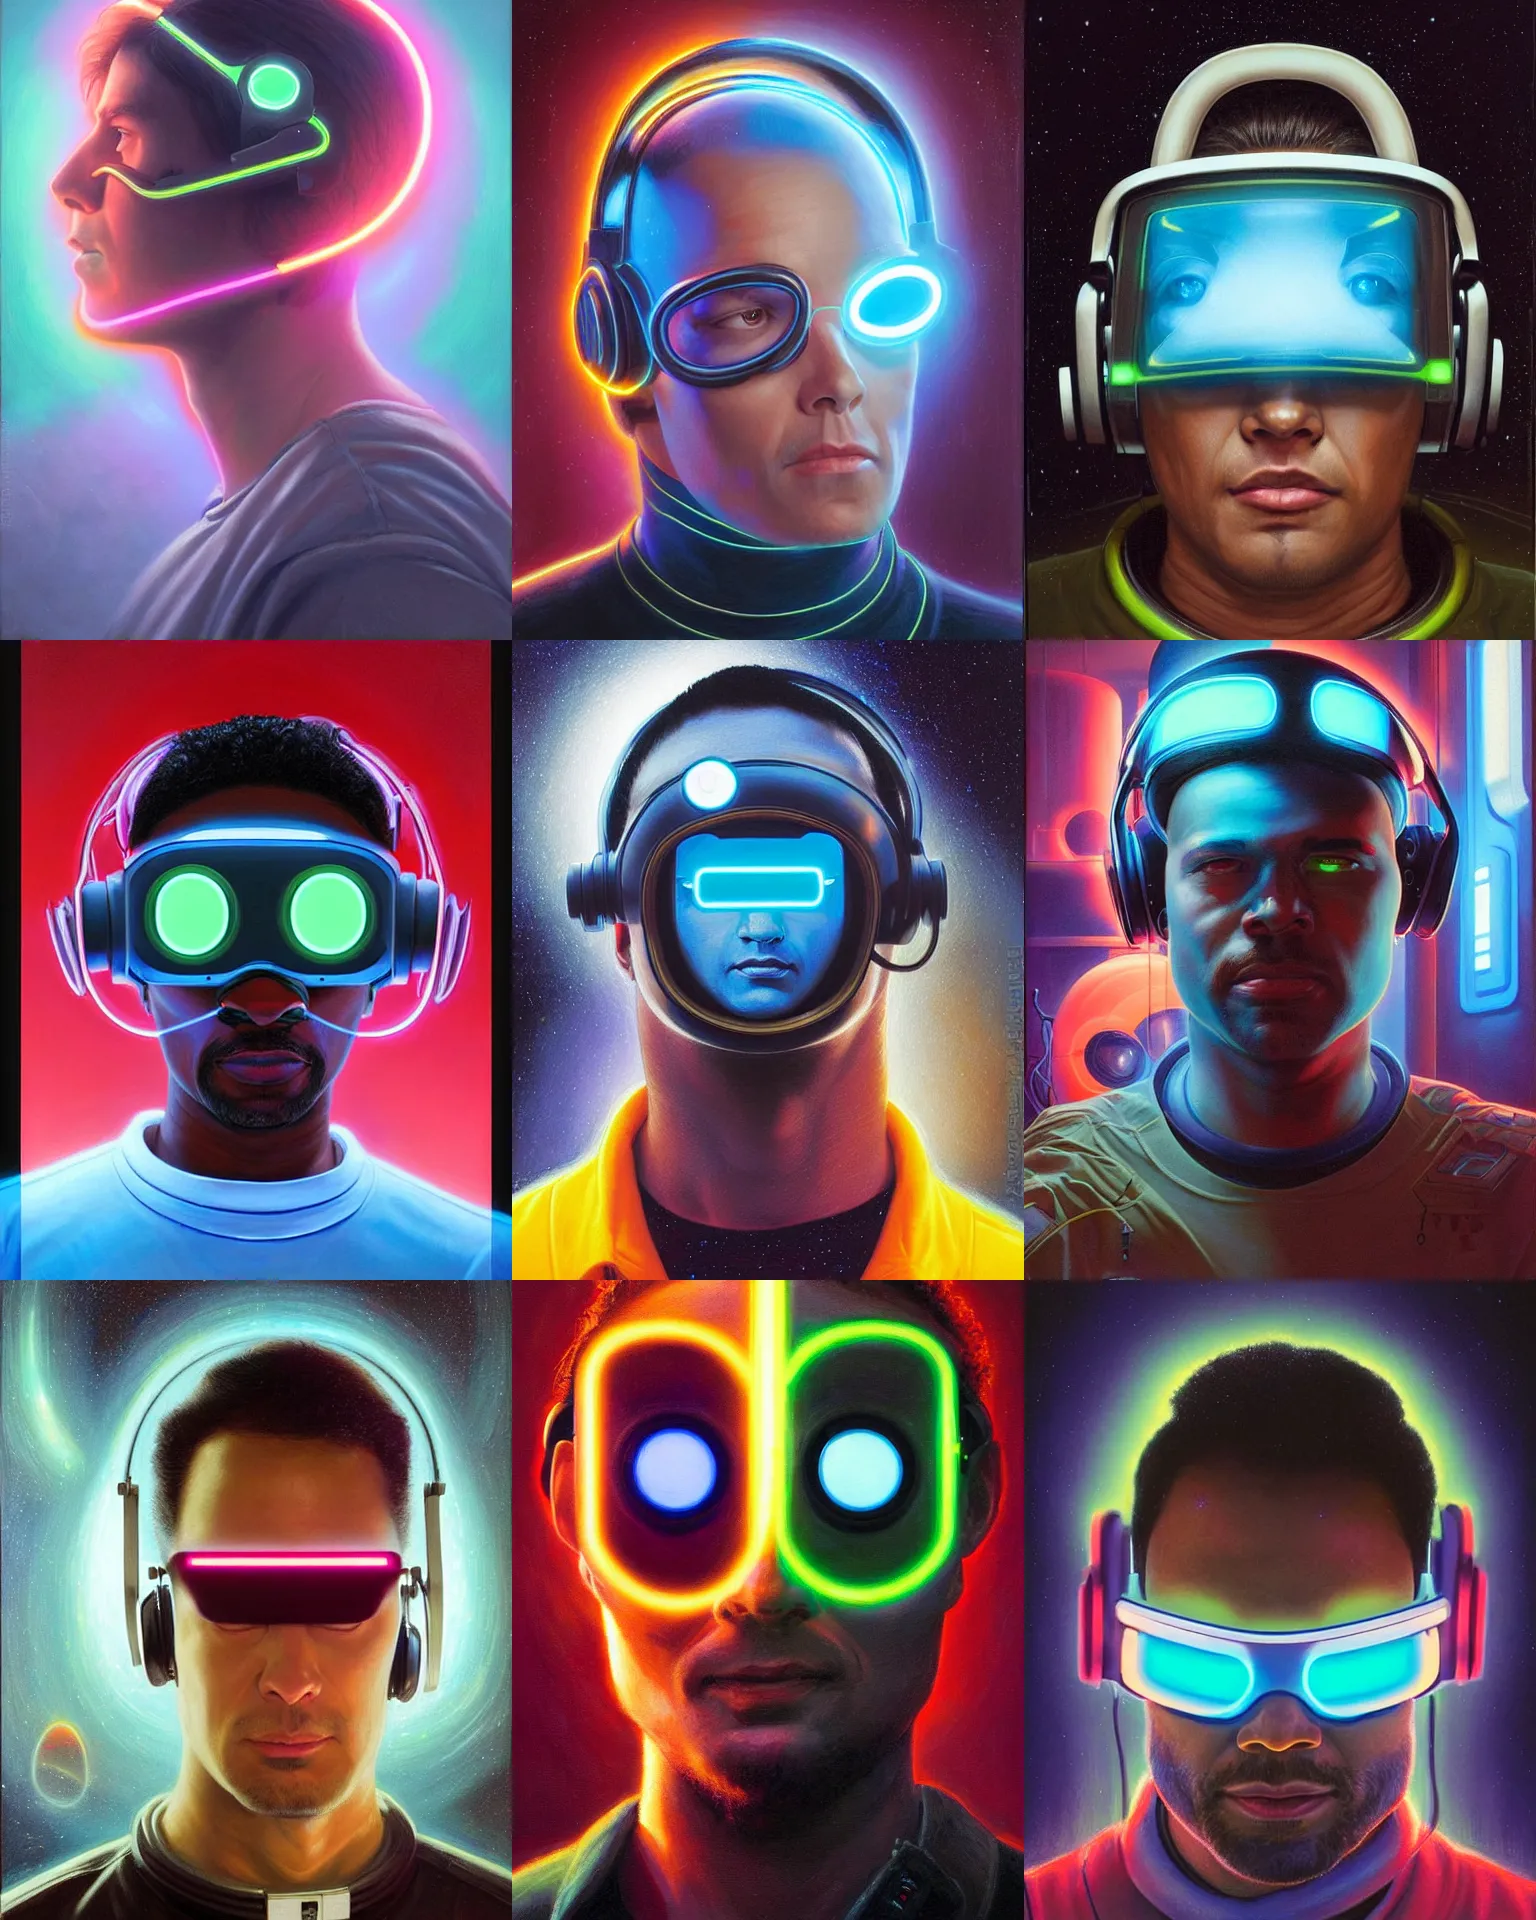 Prompt: programmer with glowing geordi cyclops visor over eyes and sleek neon headphones headshot desaturated profile portrait painting by donato giancola, dean cornwall, rhads, tom whalen, alex grey astronaut cyberpunk electric fashion photography